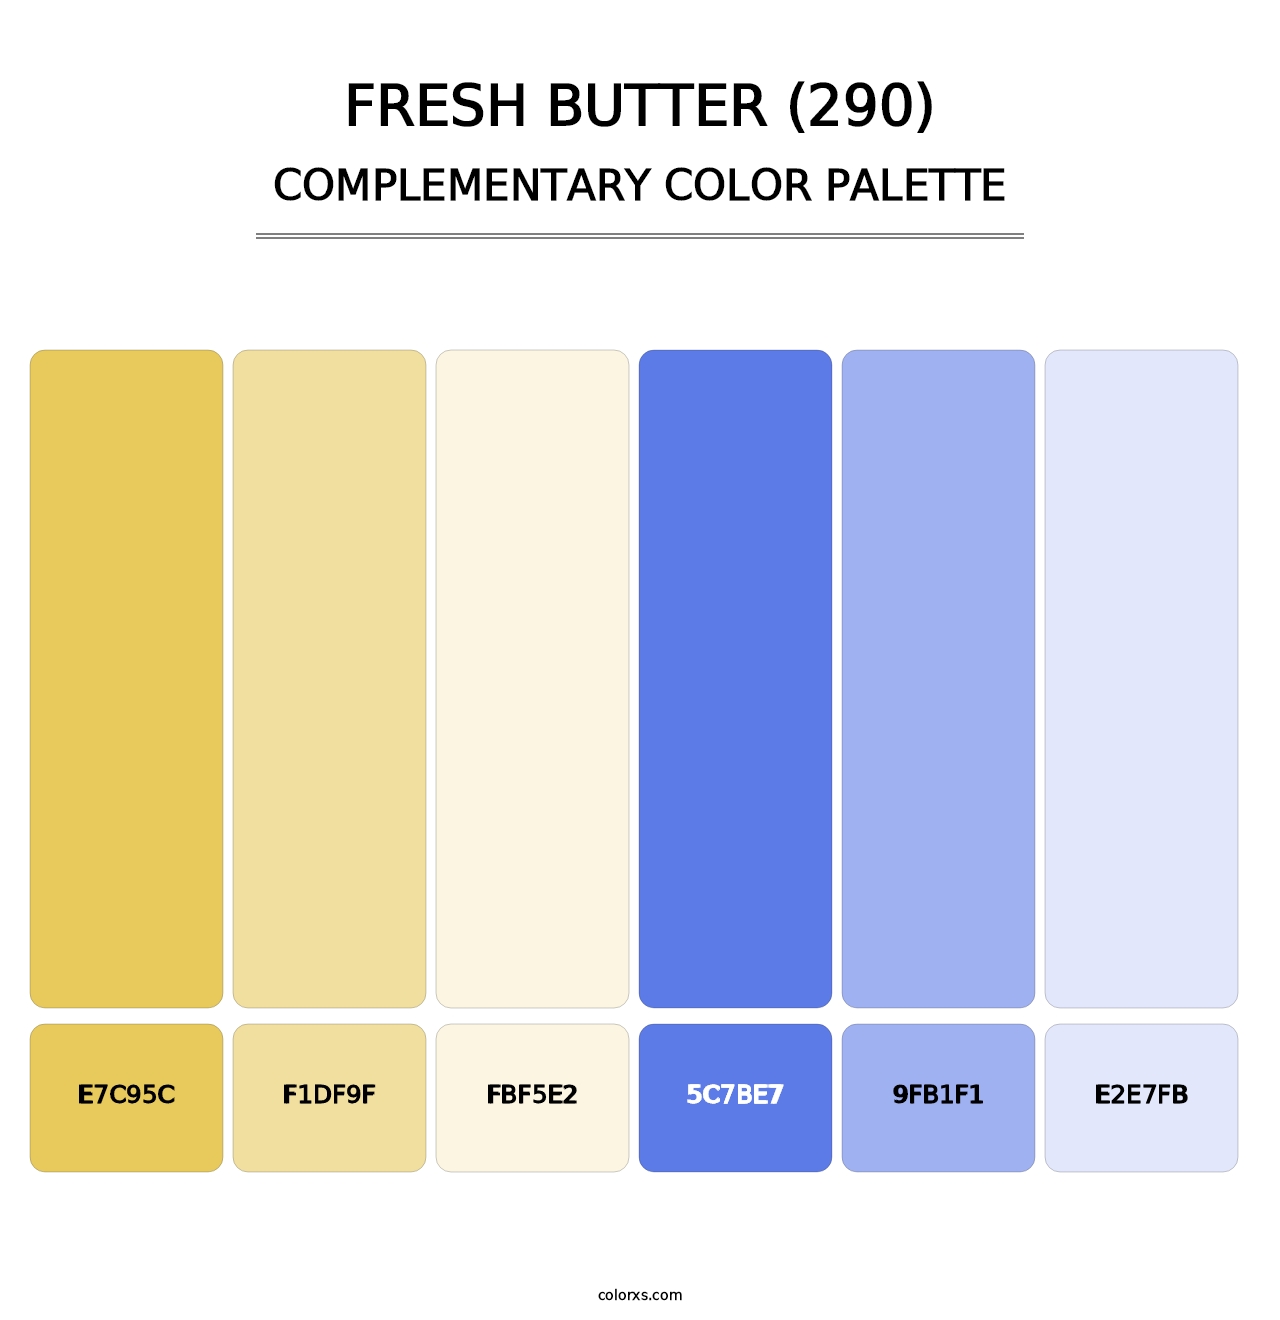 Fresh Butter (290) - Complementary Color Palette